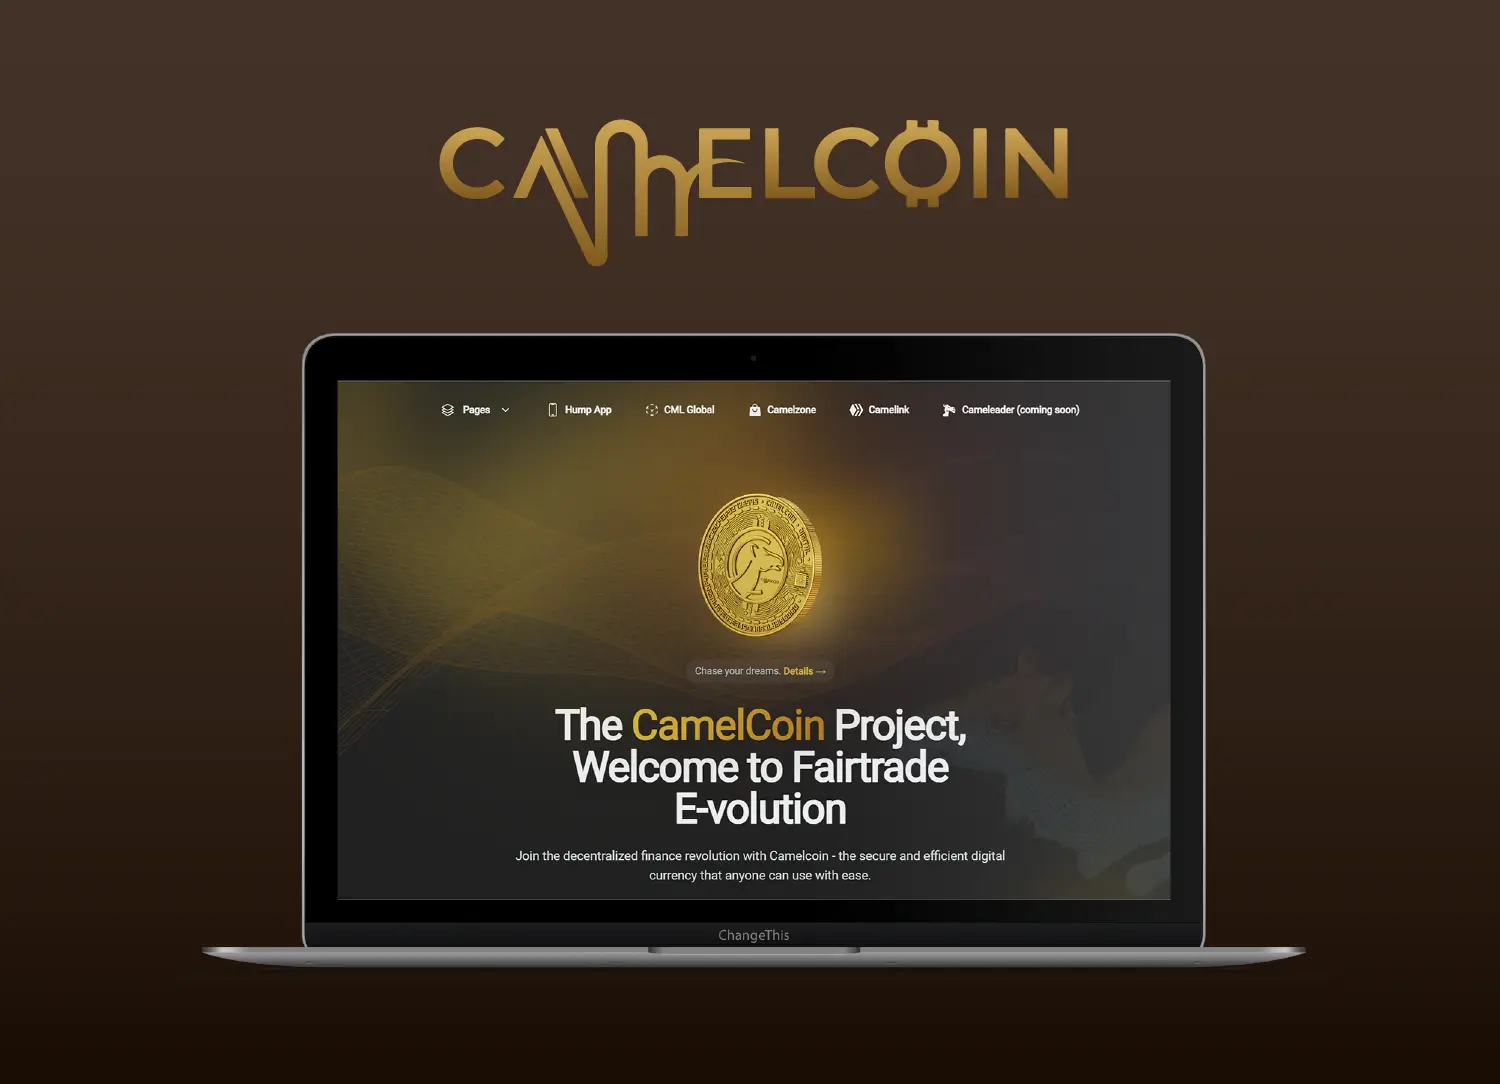 laptop screen show for the website of camelcoin groundbreaking cryptocurrency project